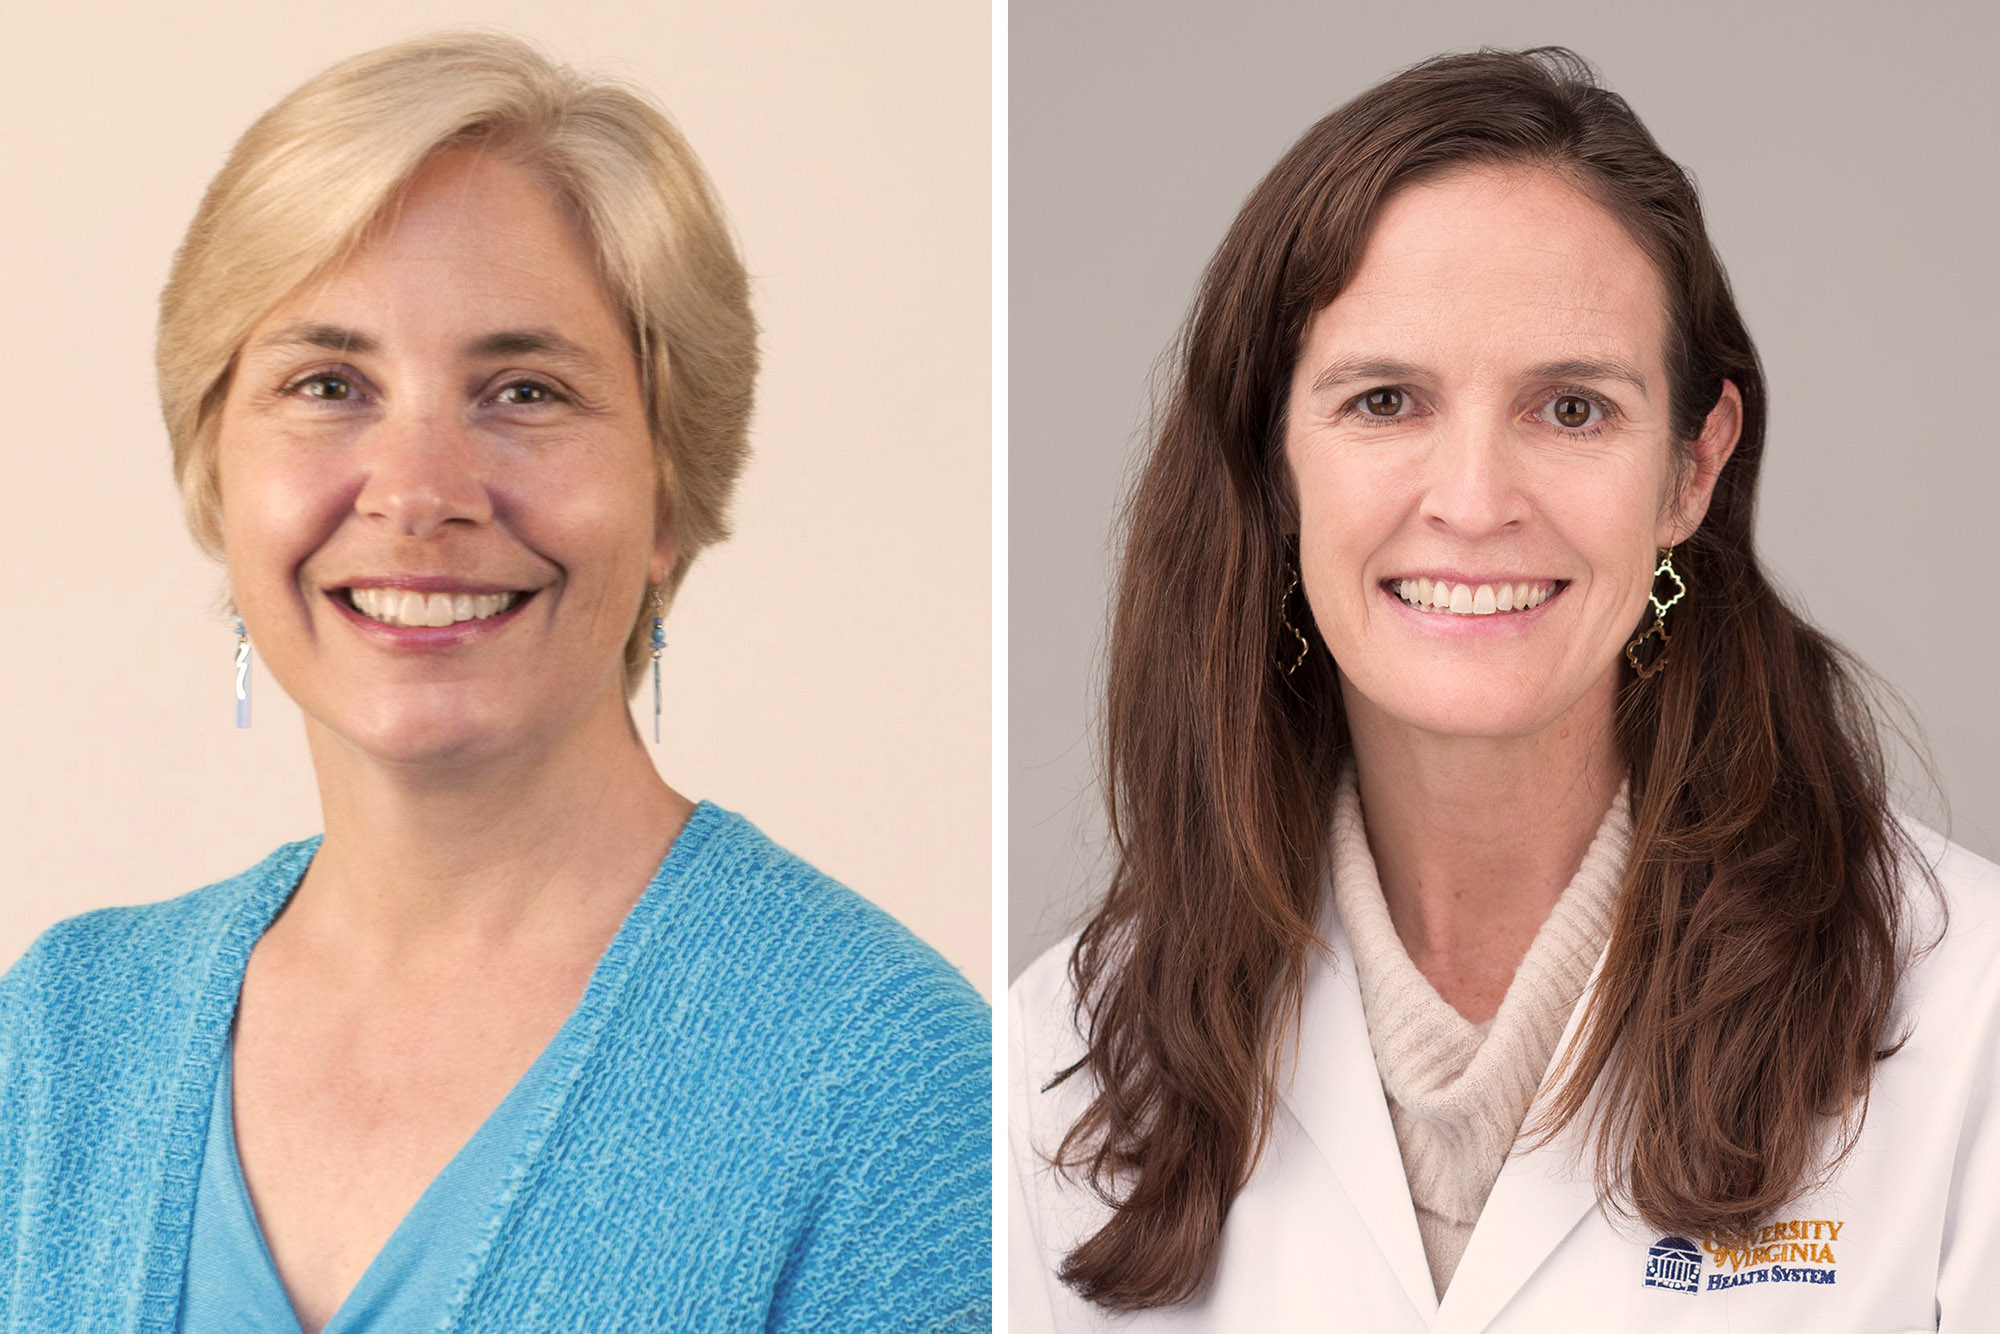 Claudia Allen, left, is director of UVA’s Family Stress Clinic. Dr. Heather Quillian is a pediatrician at Northridge Pediatrics. (Contributed photos)